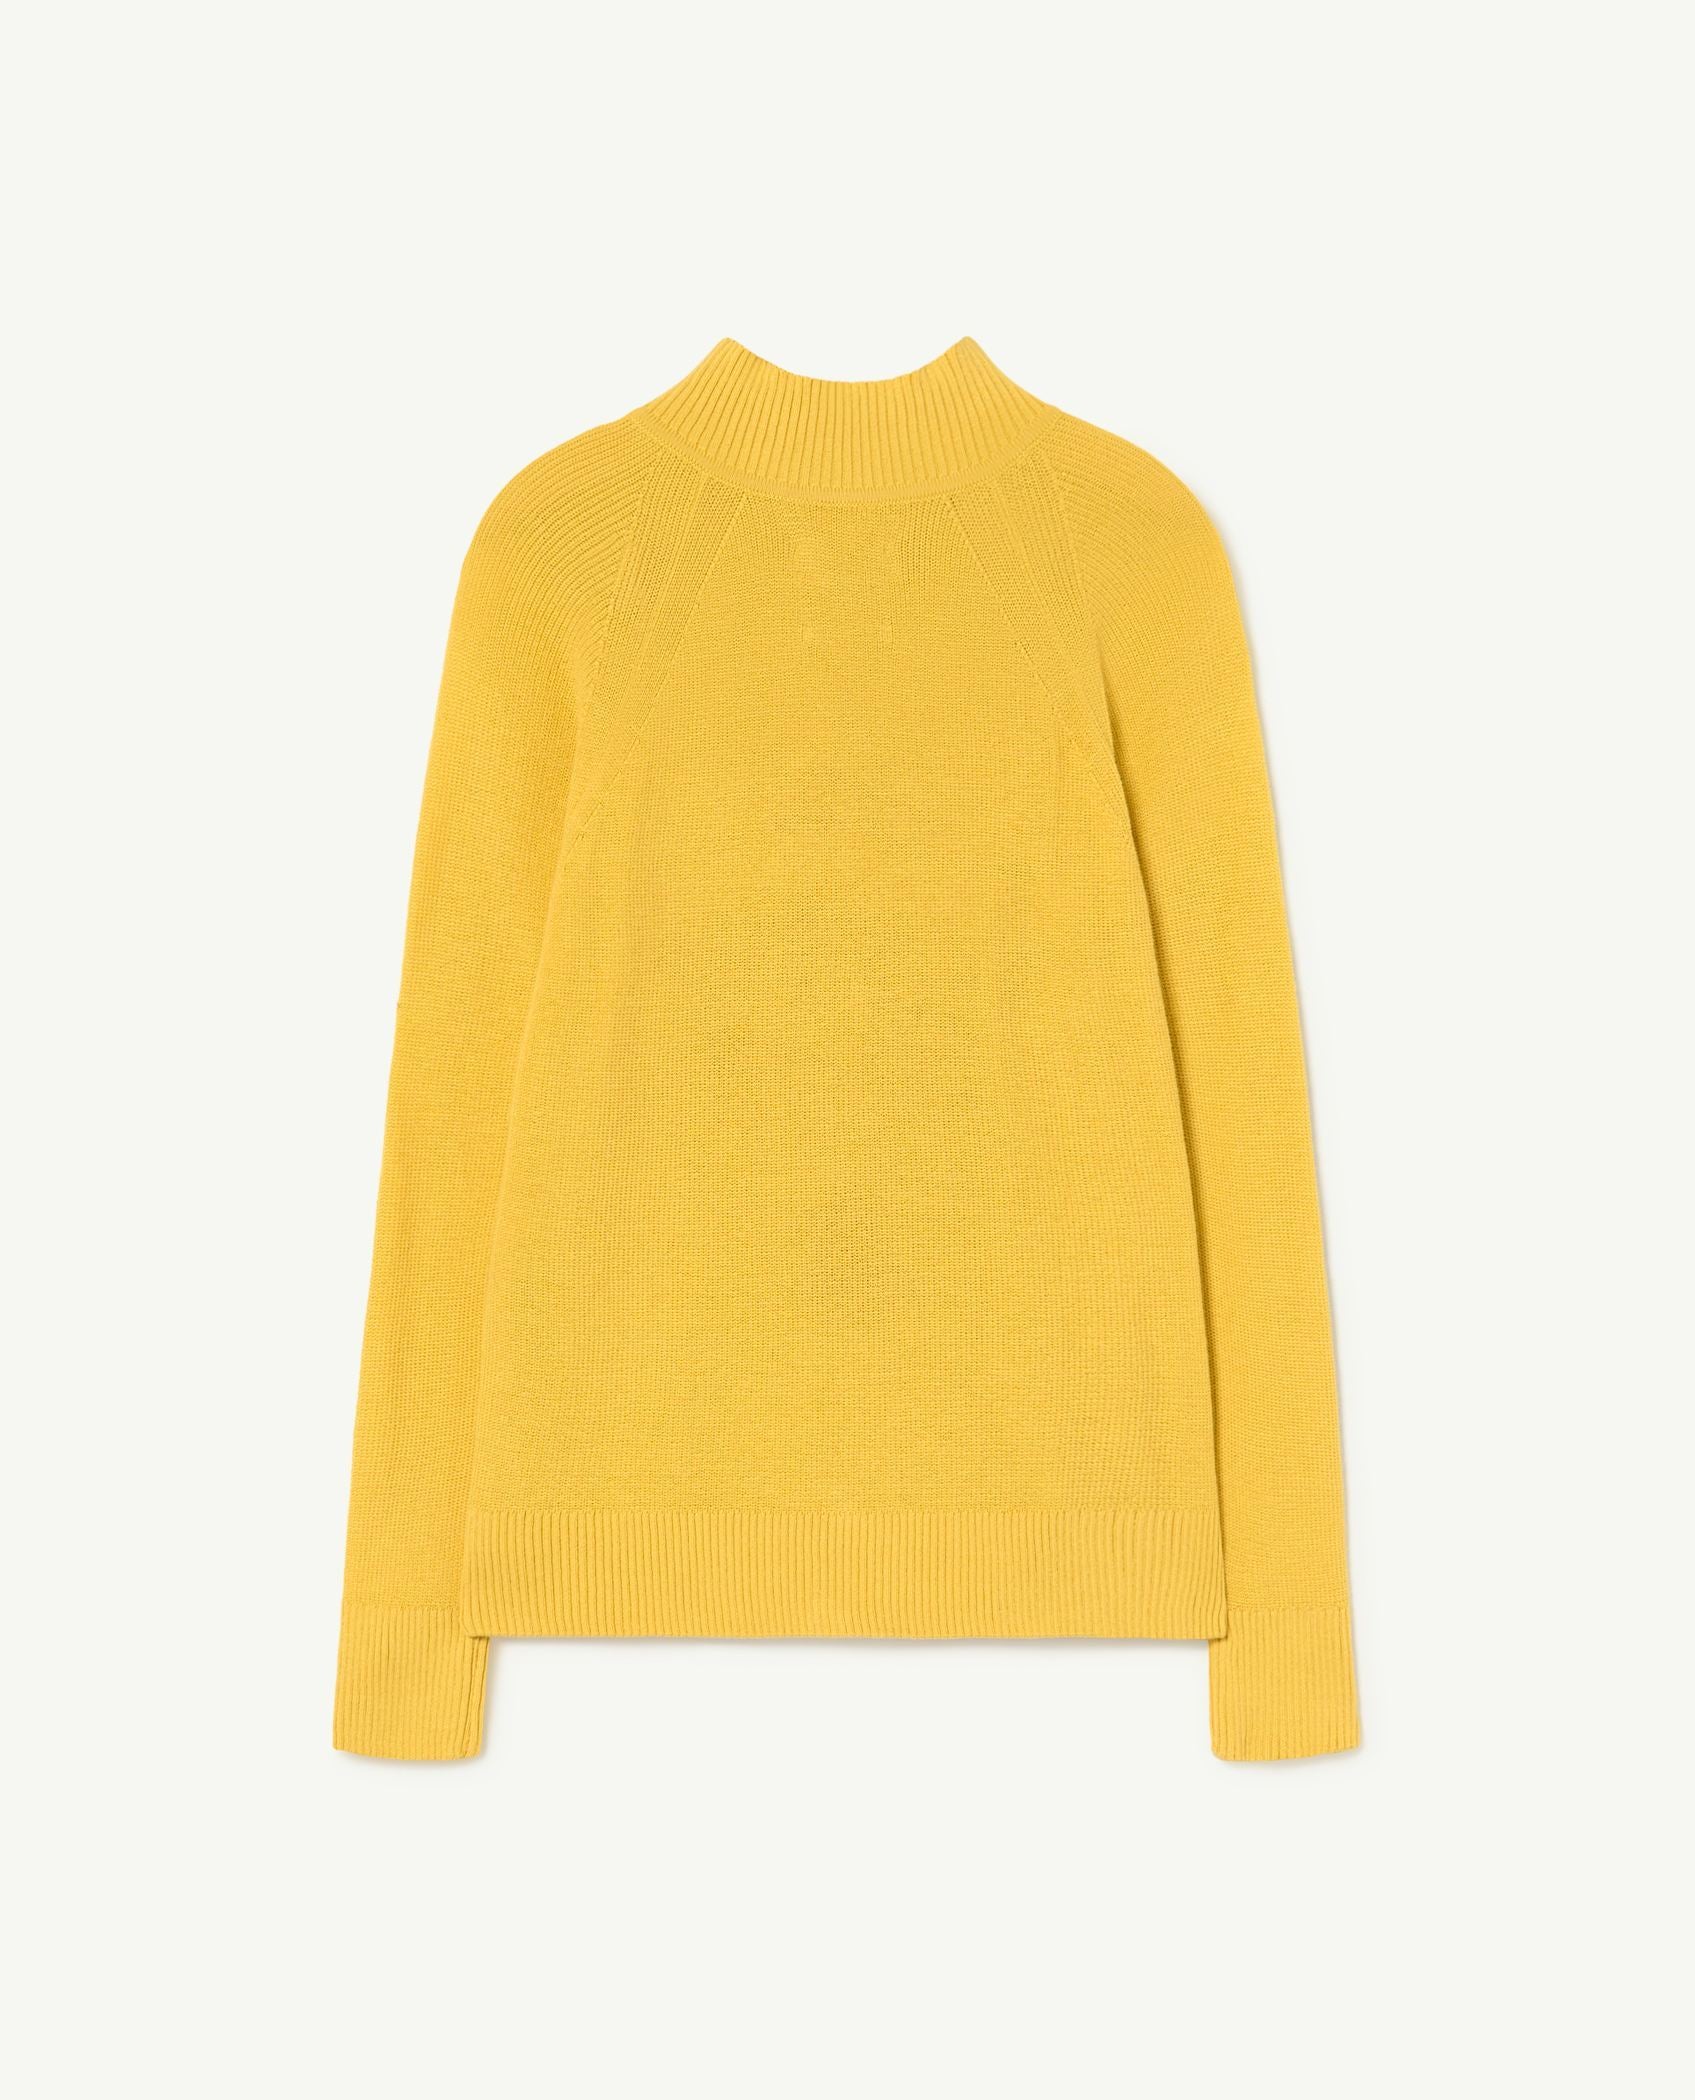 Yellow The Animals Club Raven Sweater PRODUCT BACK